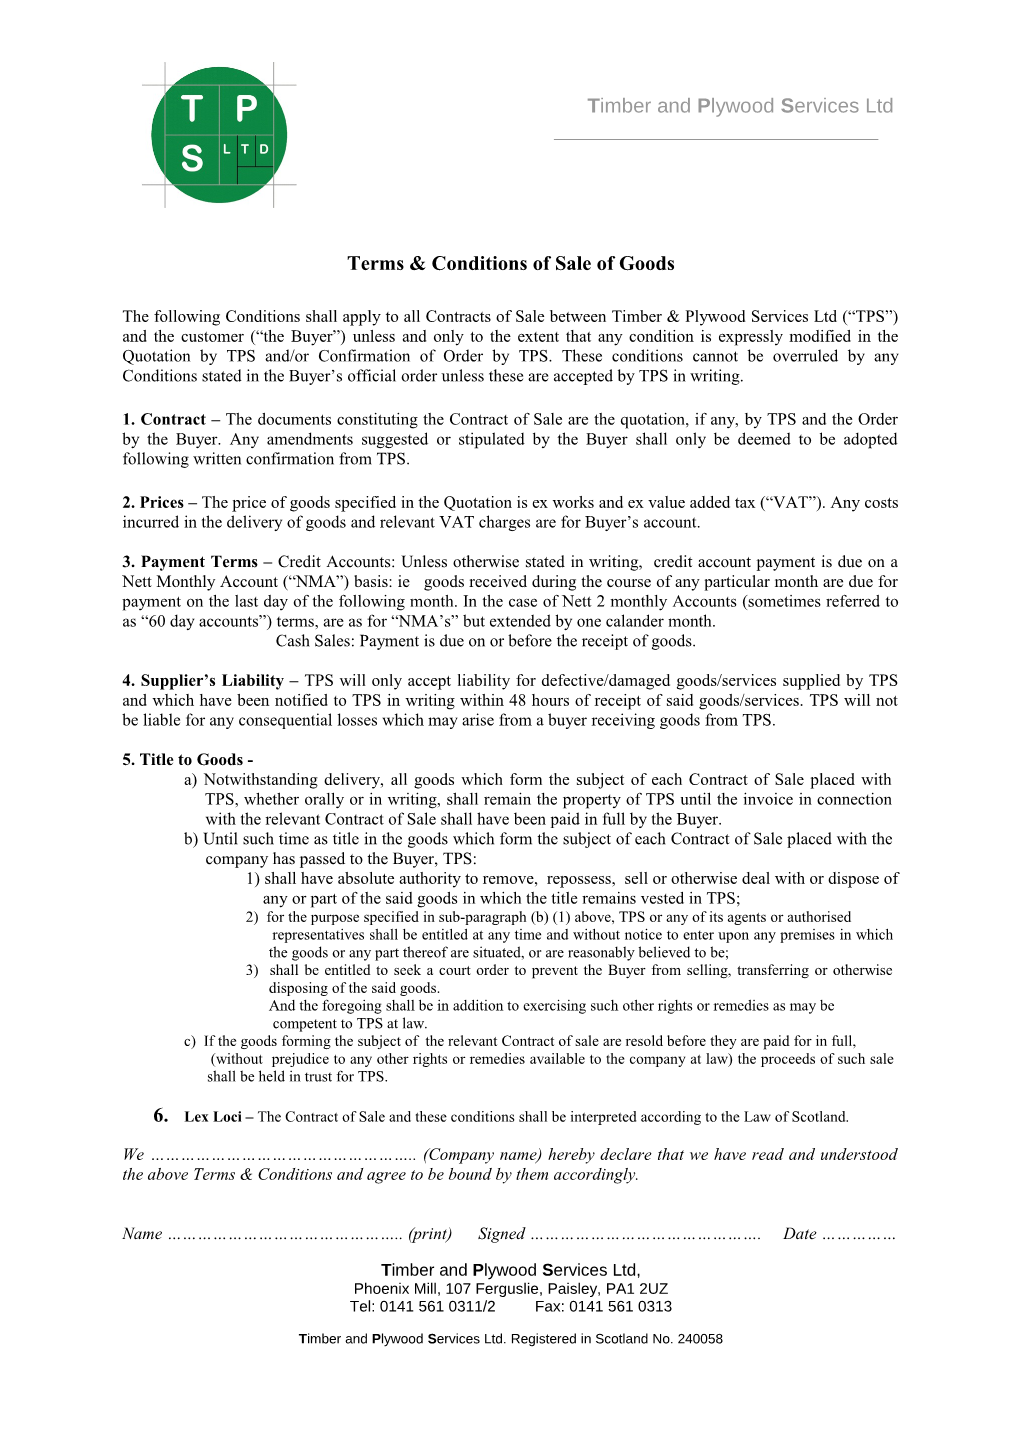 Terms & Conditions of Sale of Goods